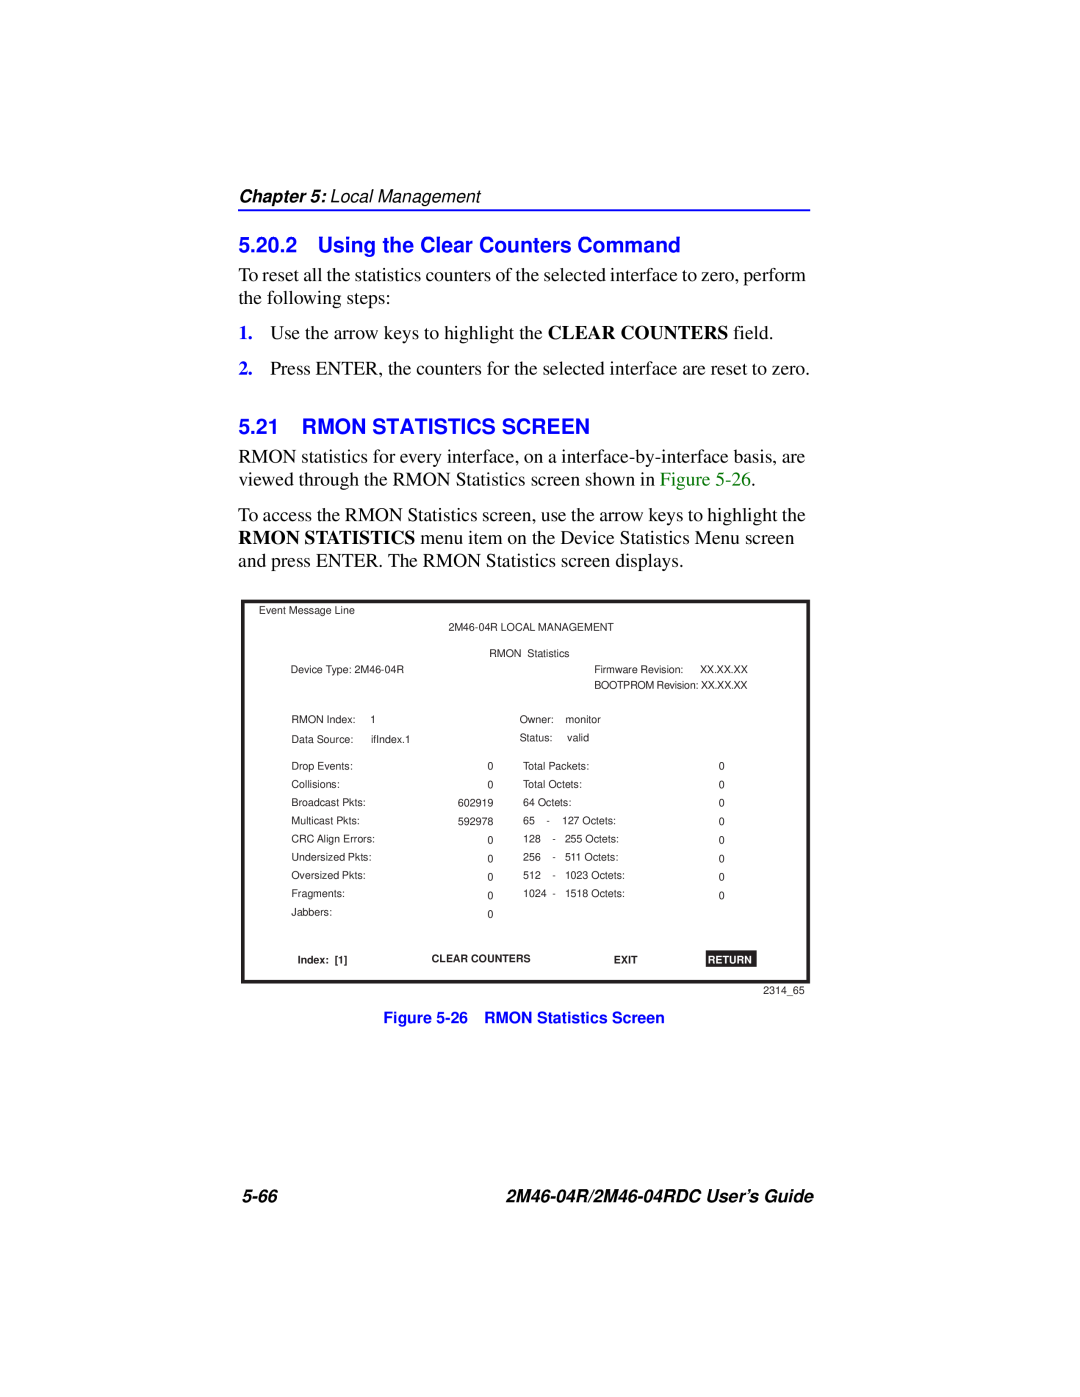 Cabletron Systems pmn manual Using the Clear Counters Command, Rmon Statistics Screen 